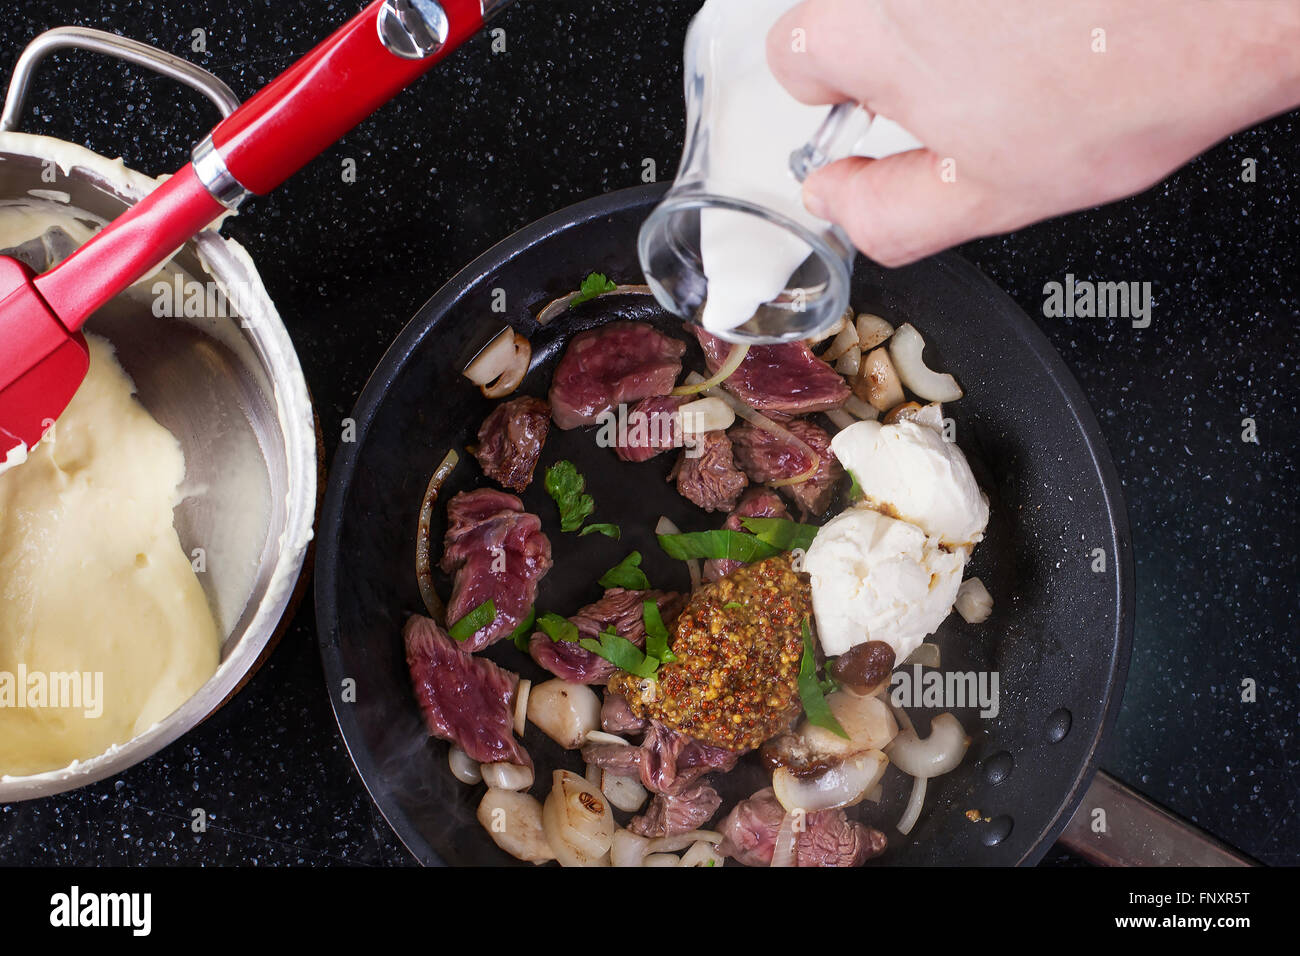 Assorted raw ingredients for Beef Stroganoff with mashed potatoes or celery. Top view - Stock image Stock Photo